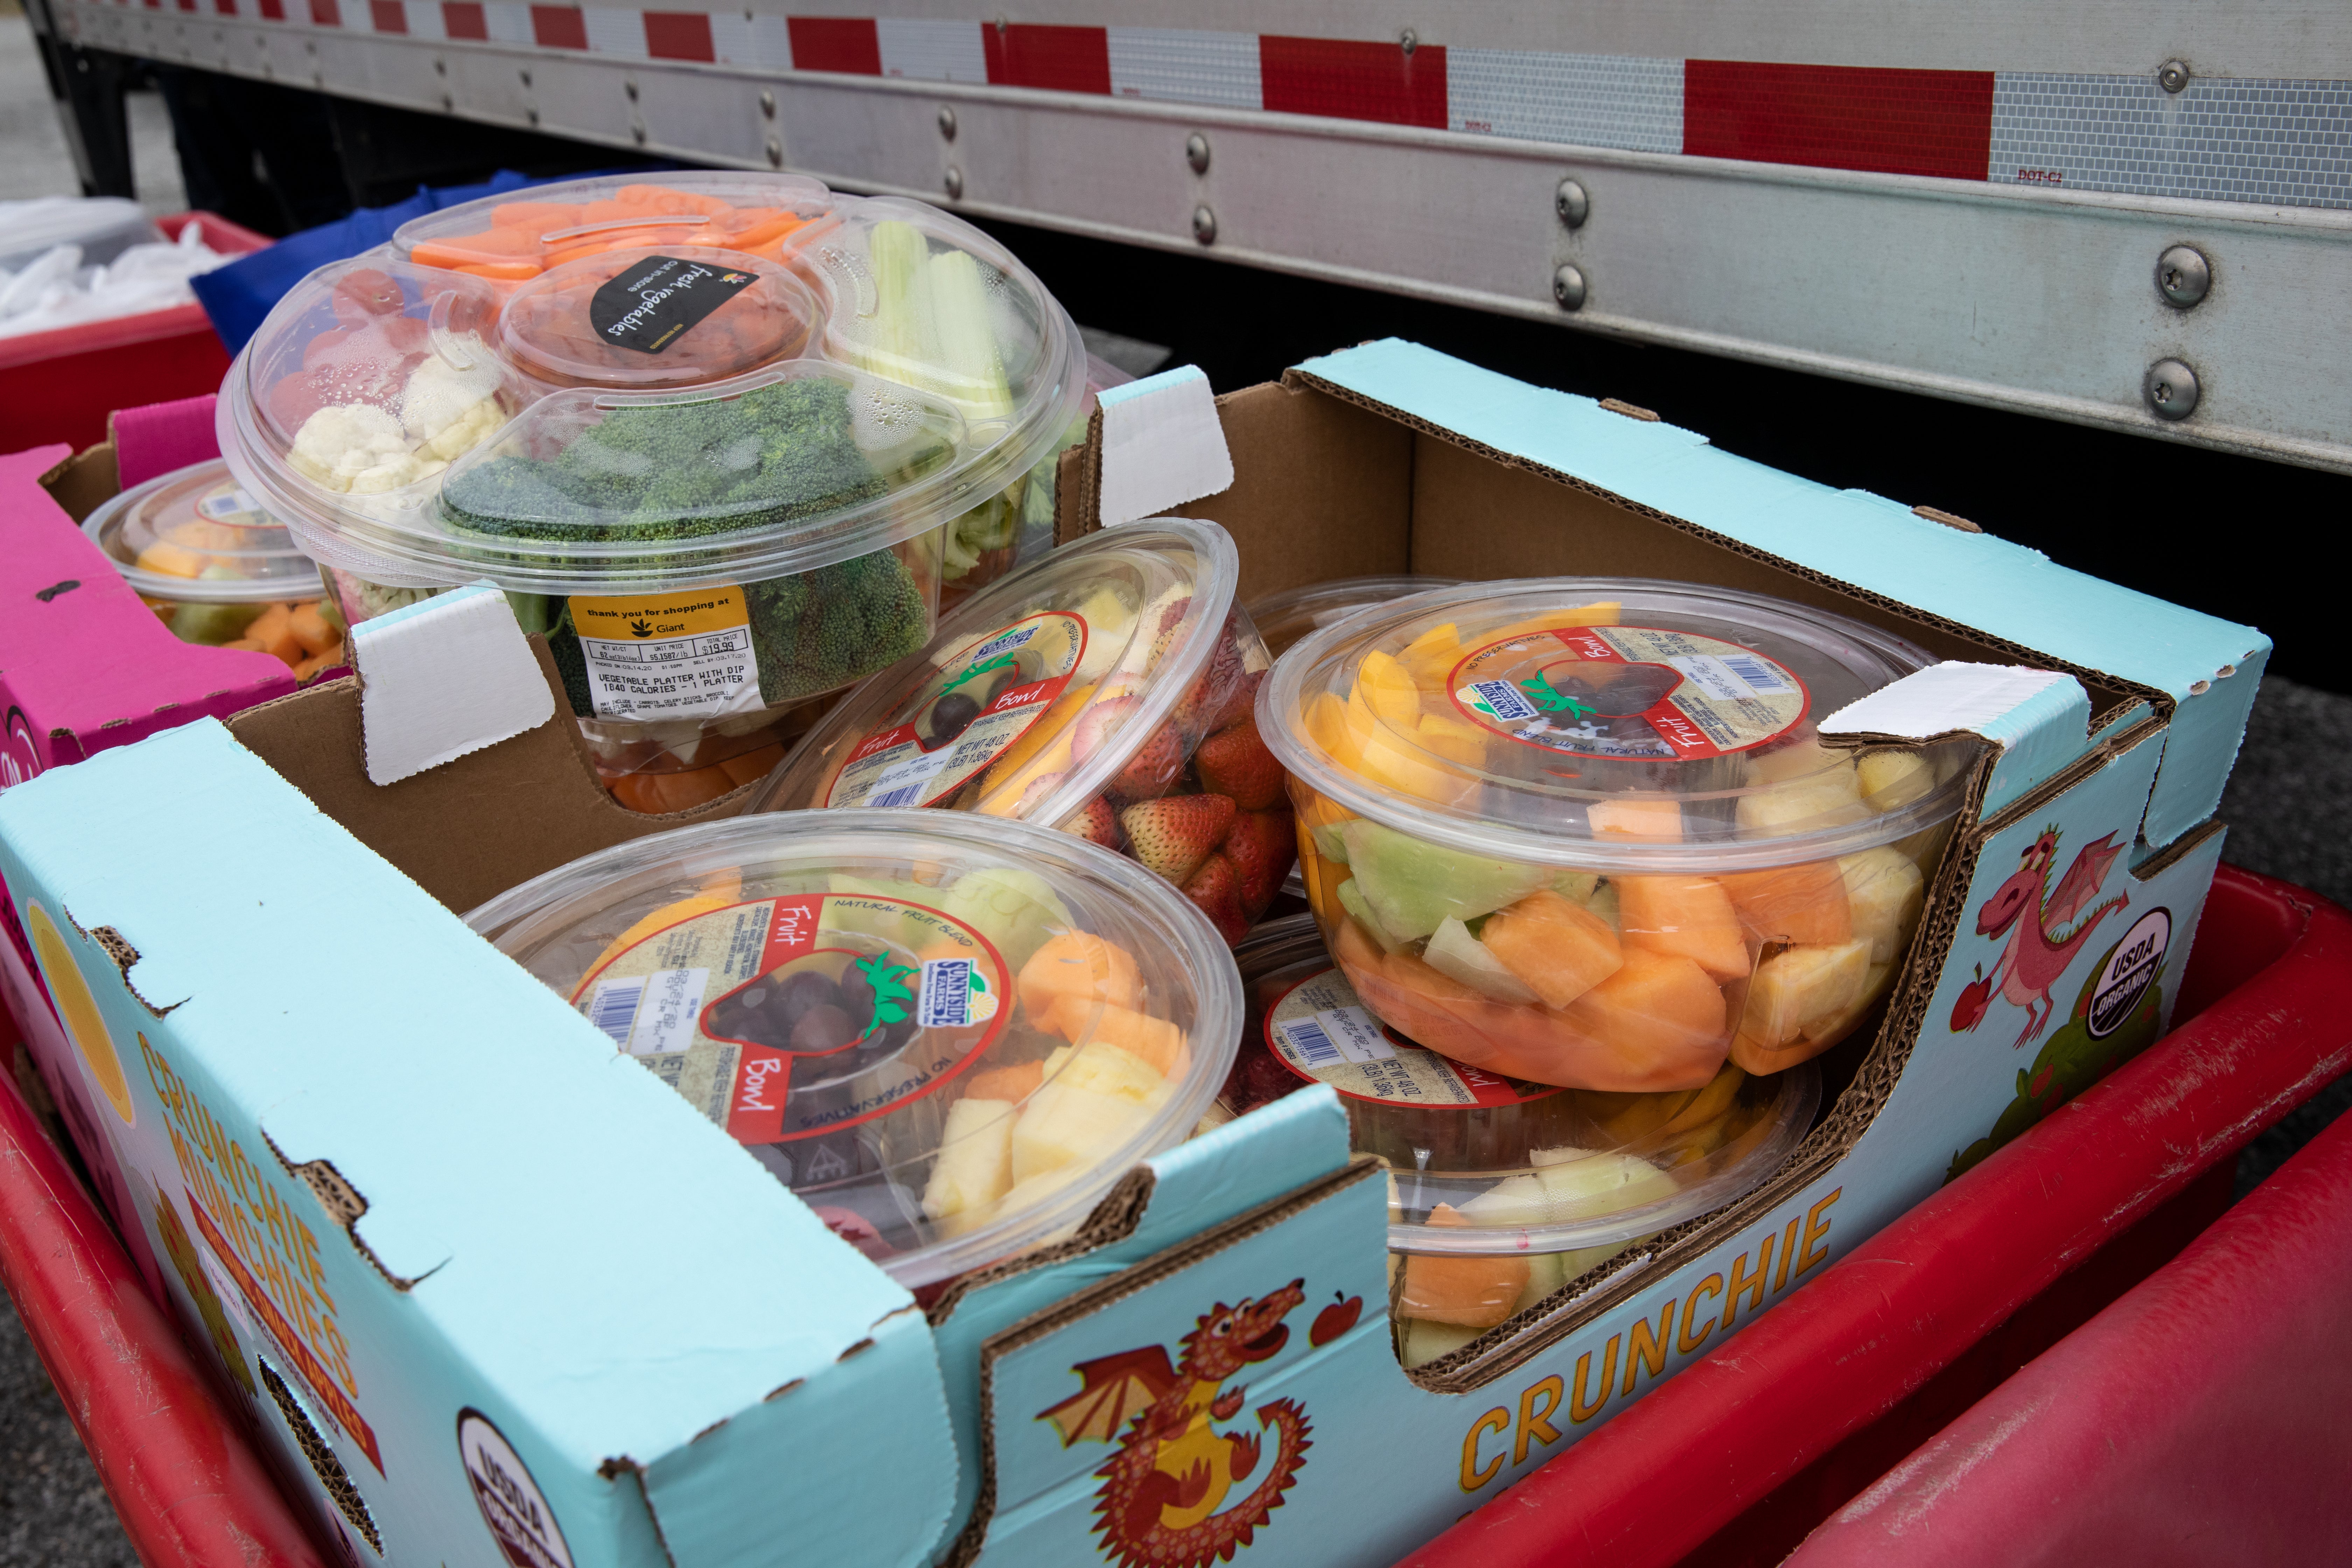 Fruit and vegetables distributed to those in need